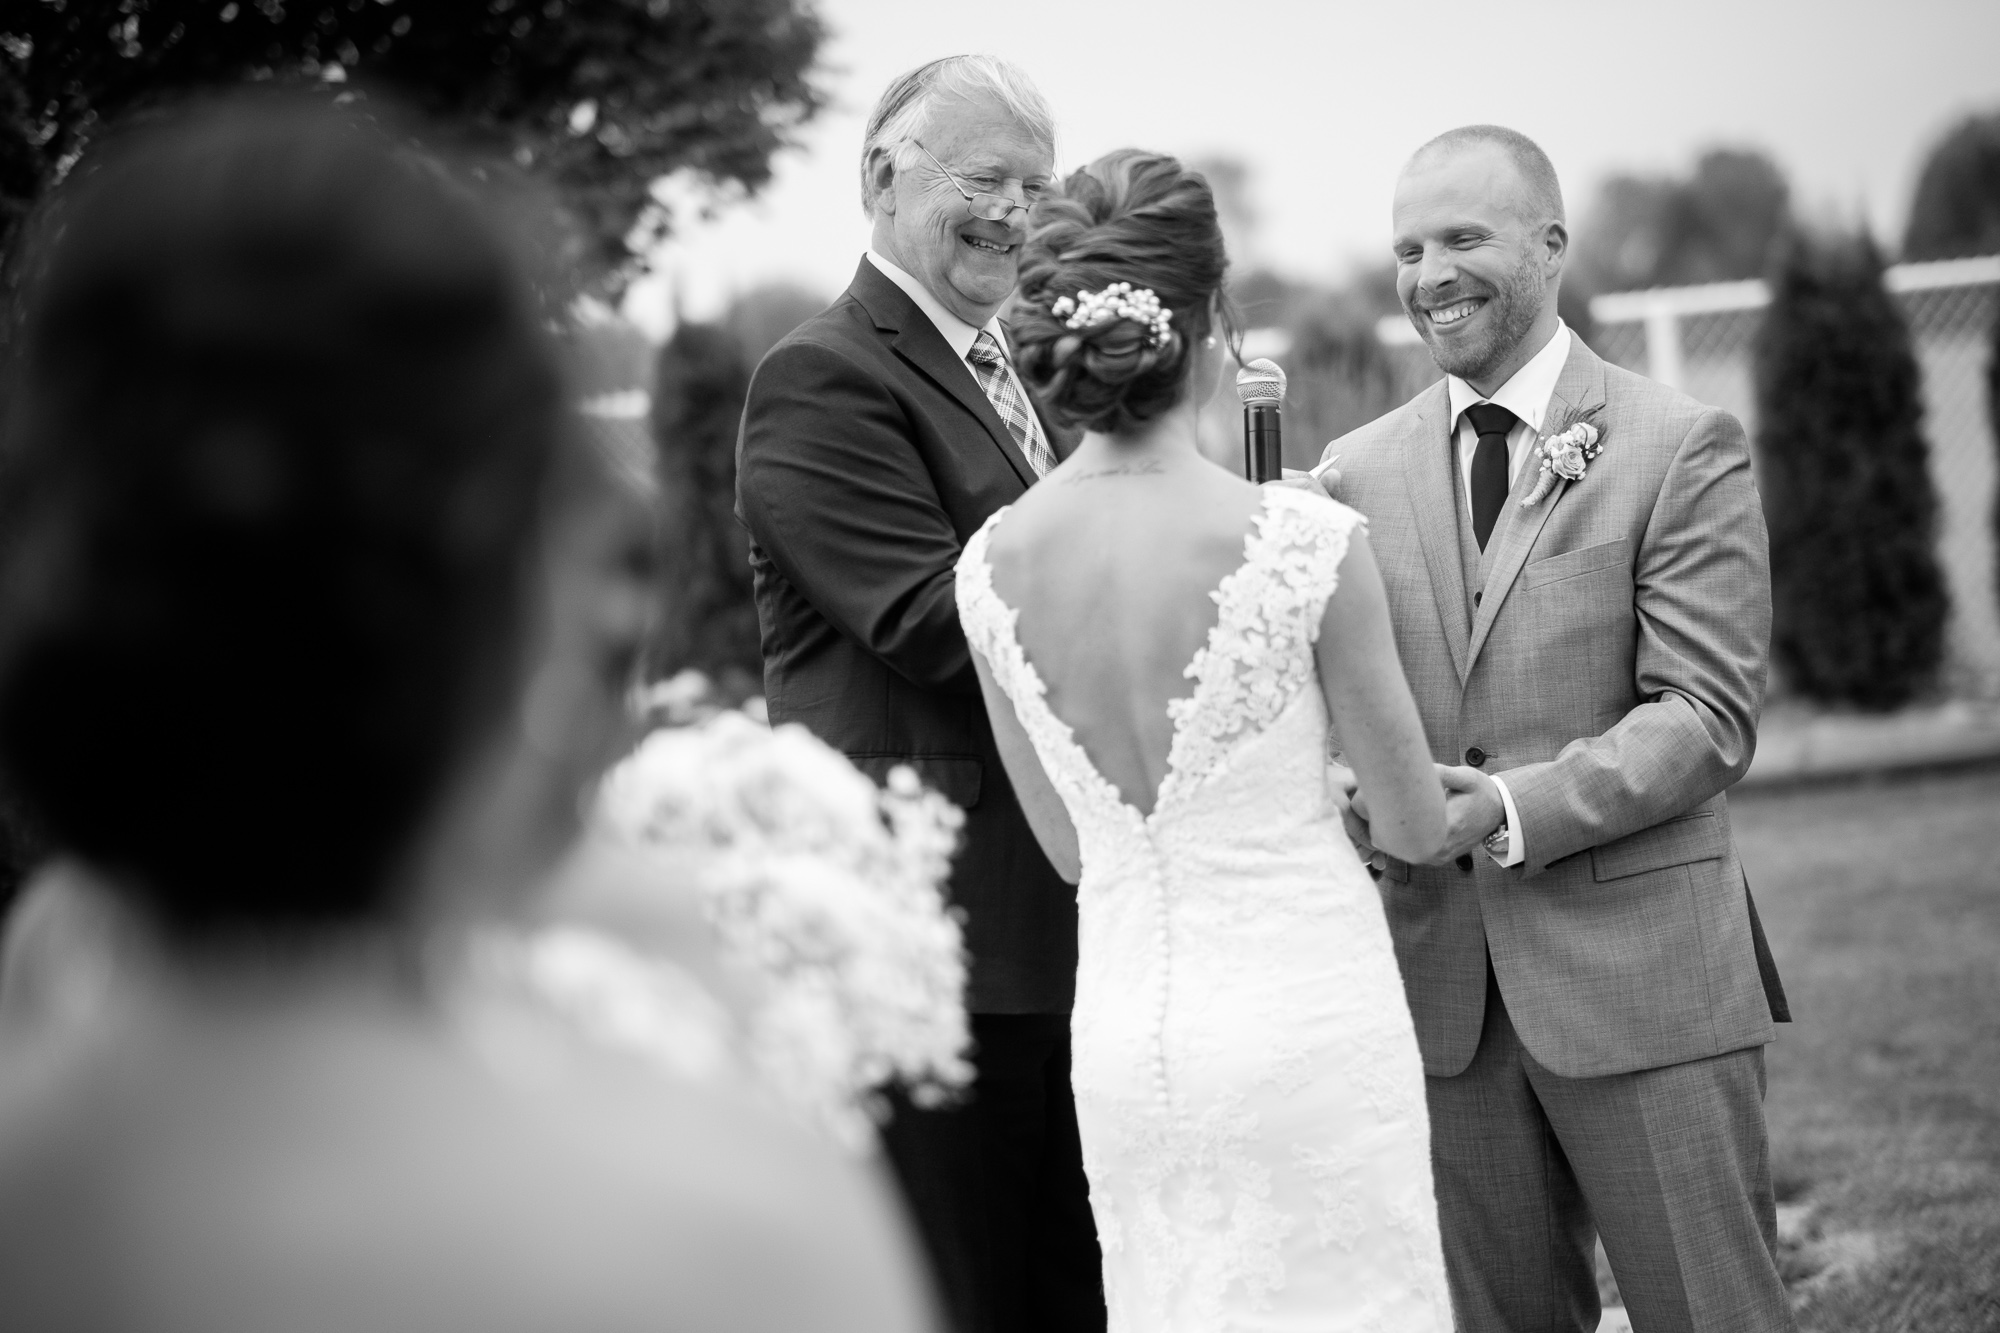  Rebecca + Jeff laugh as they exchange vows during their wedding ceremony at the Hessenland Inn. 